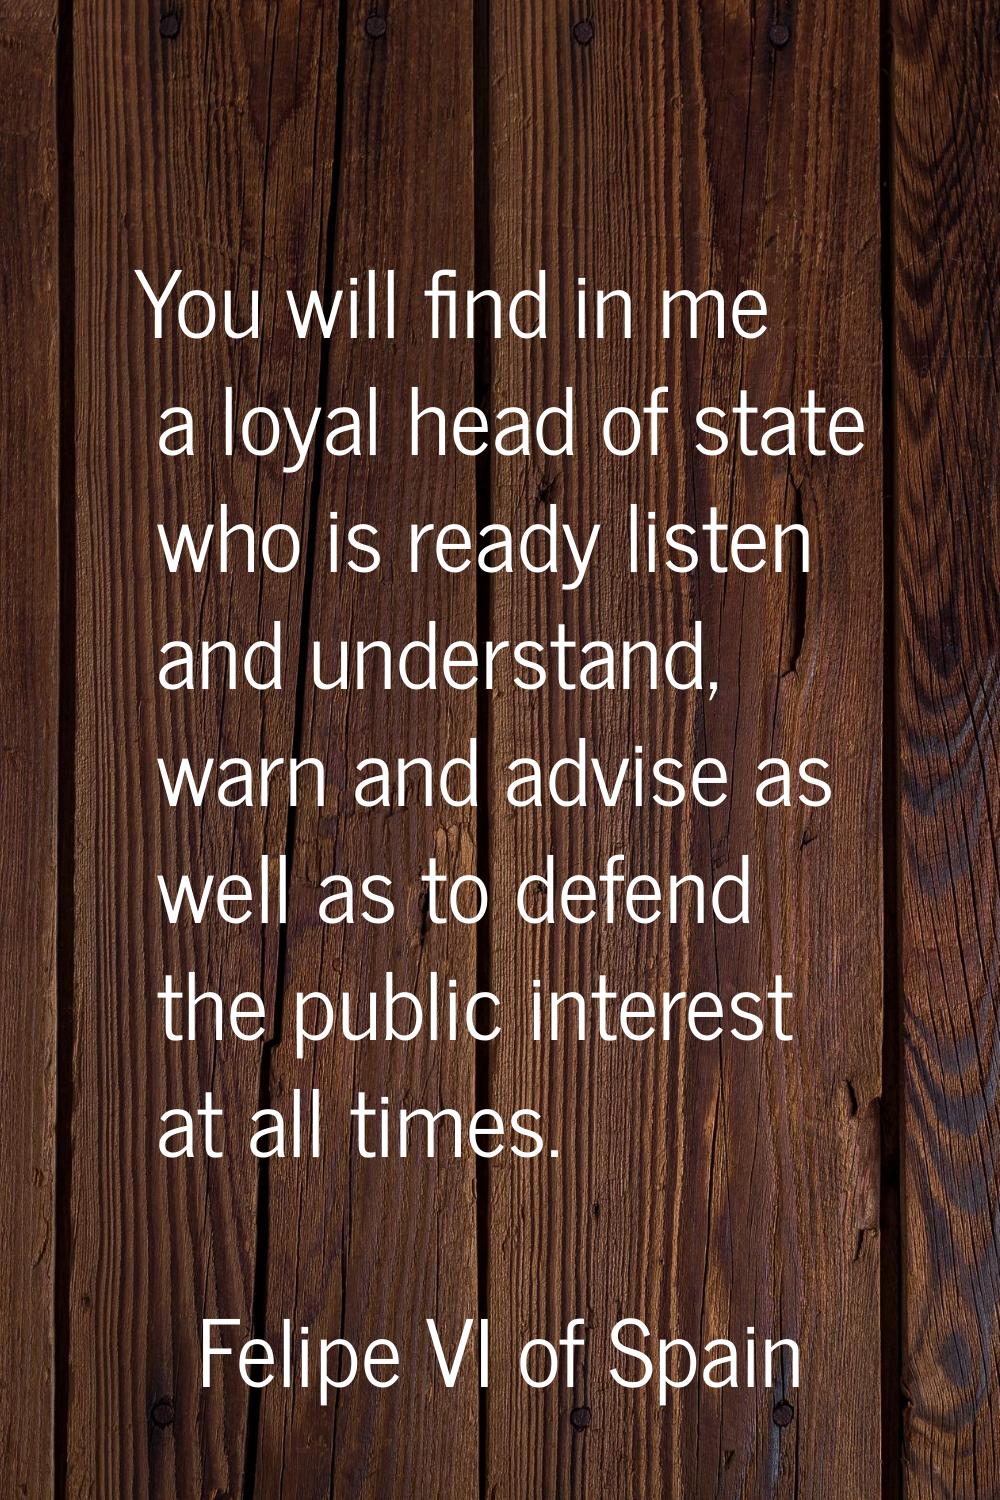 You will find in me a loyal head of state who is ready listen and understand, warn and advise as we